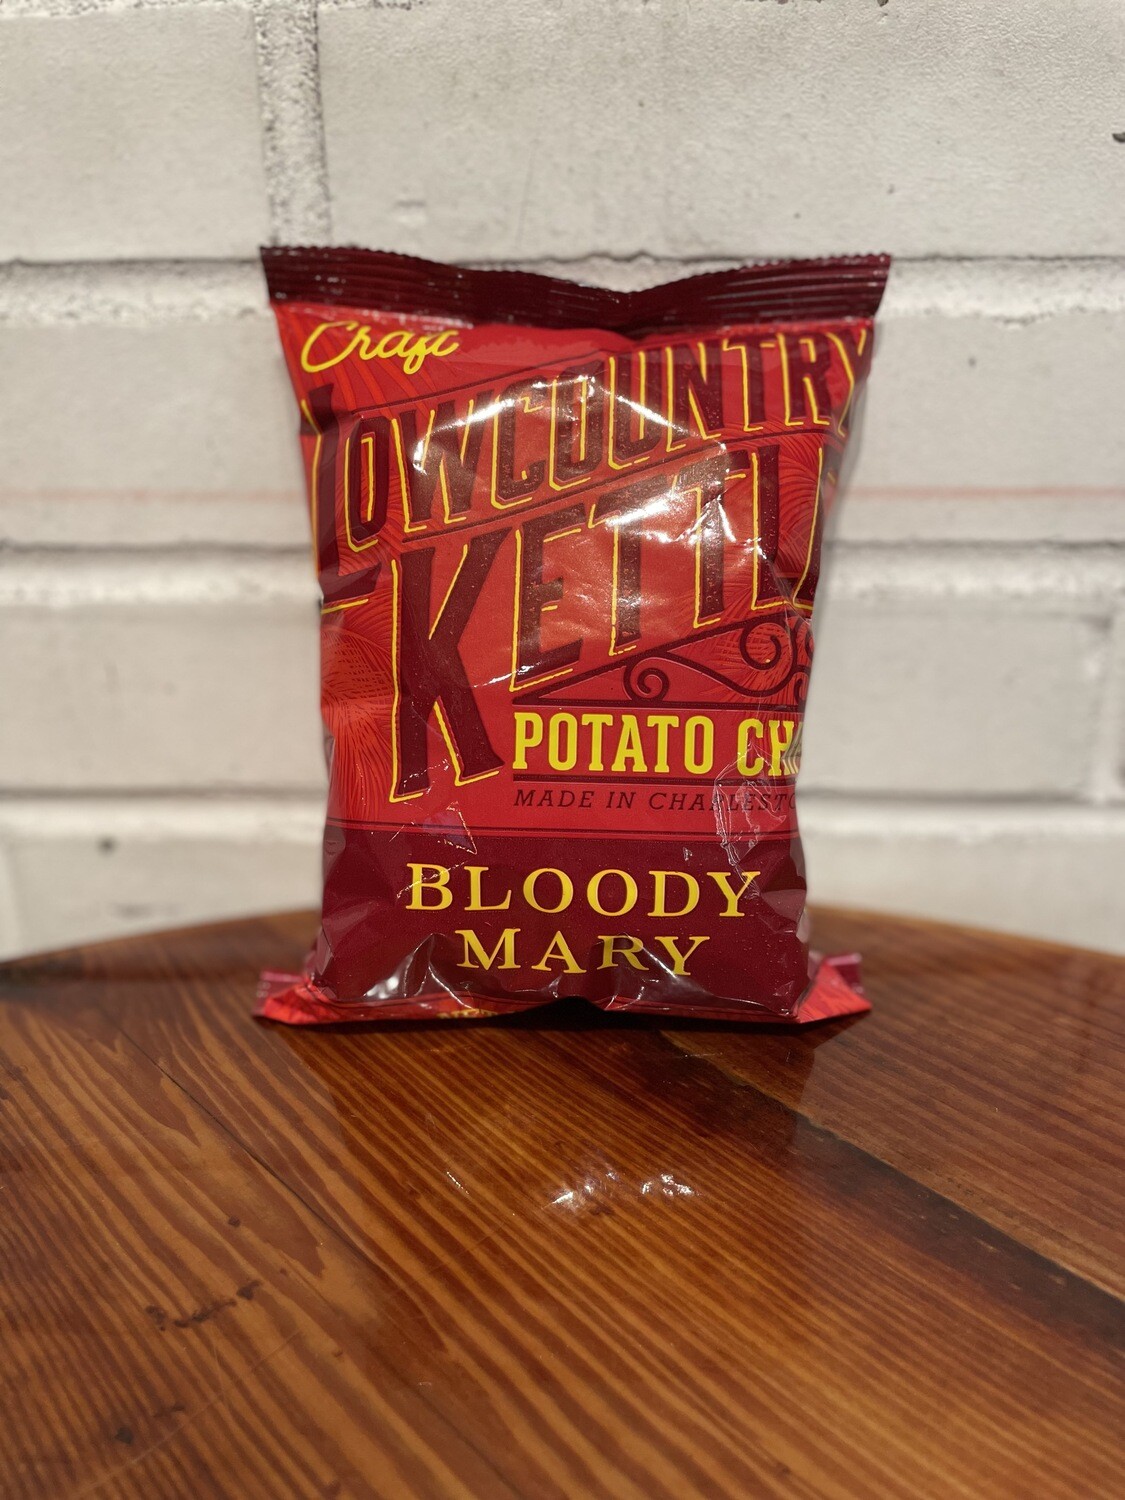 Lowcountry Kettle Bloody Mary Chips